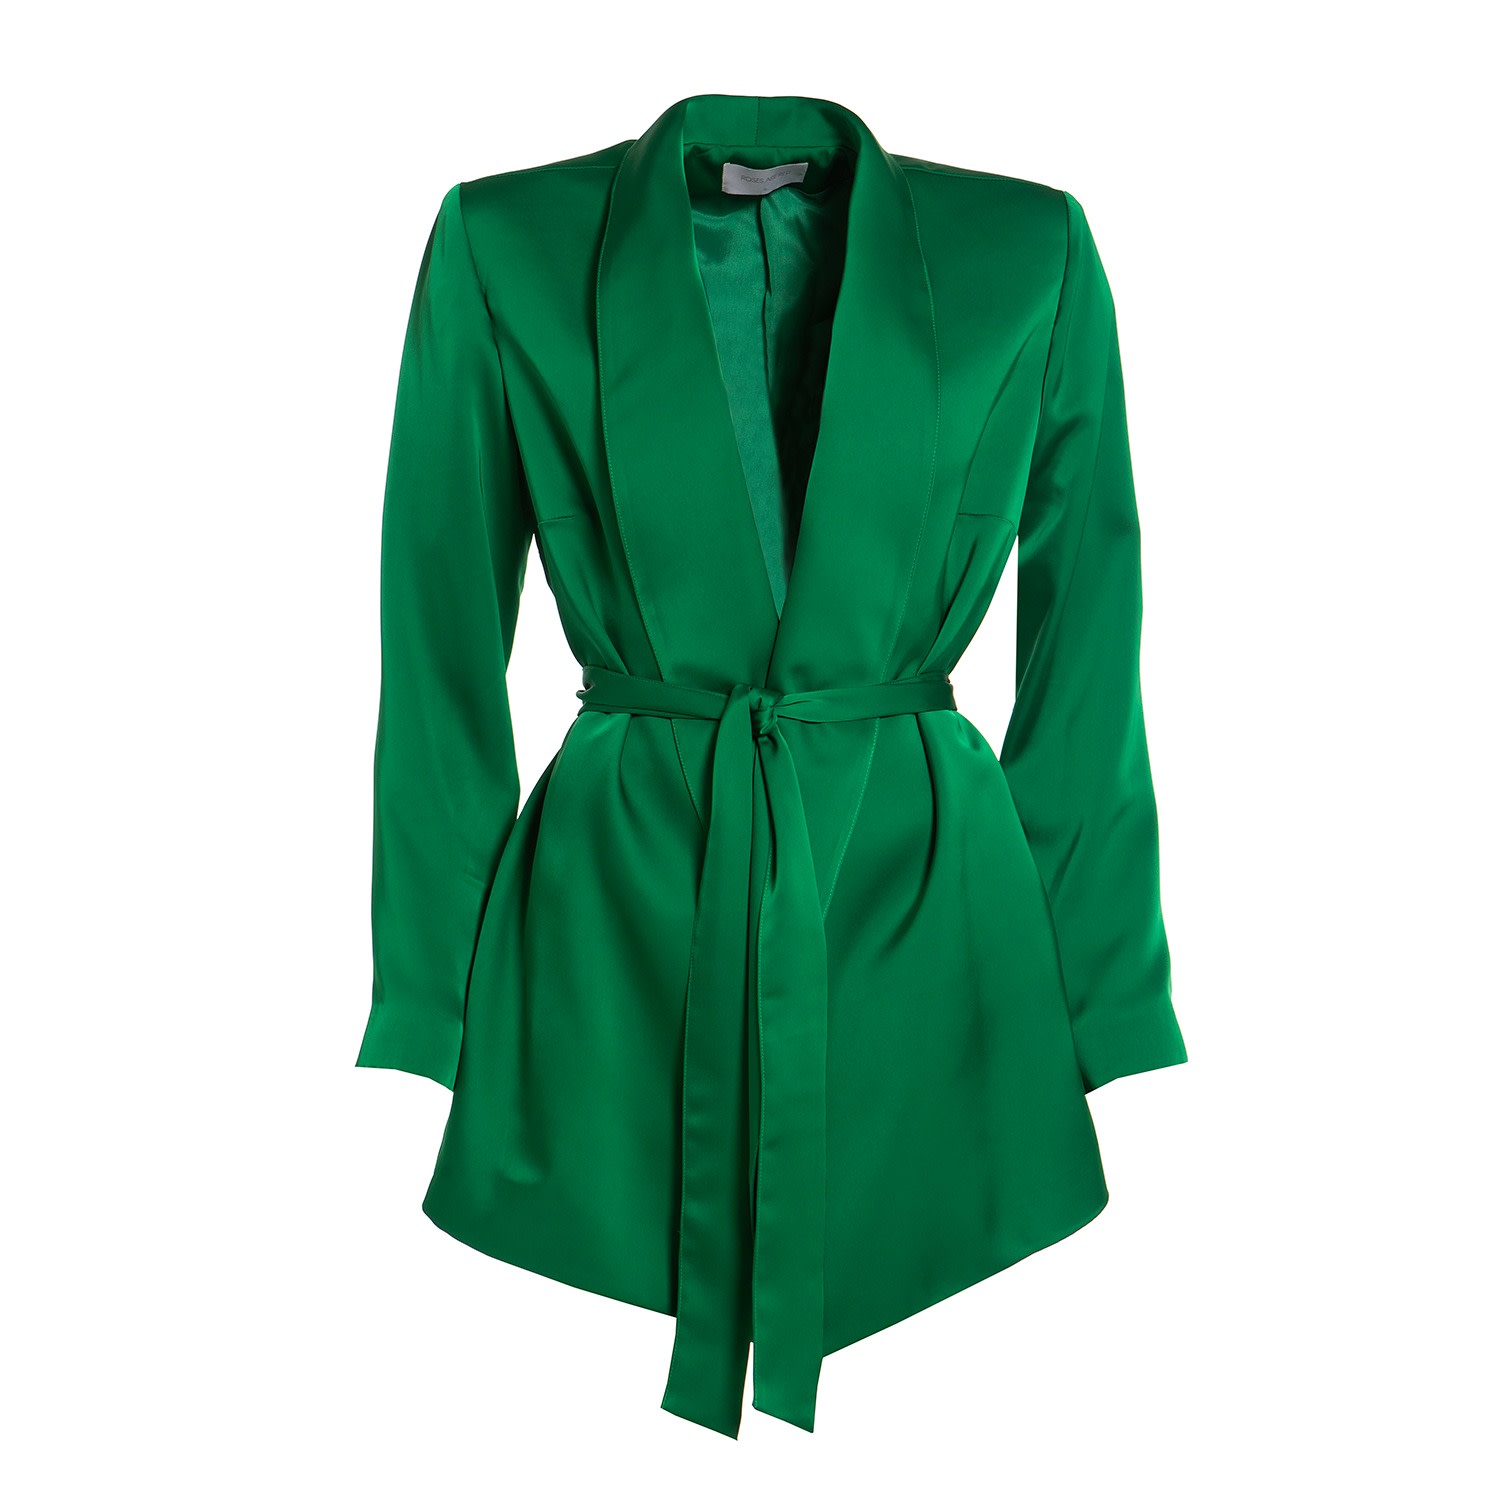 Women’s The Suit Blazer In Emerald Green Small Roses are Red